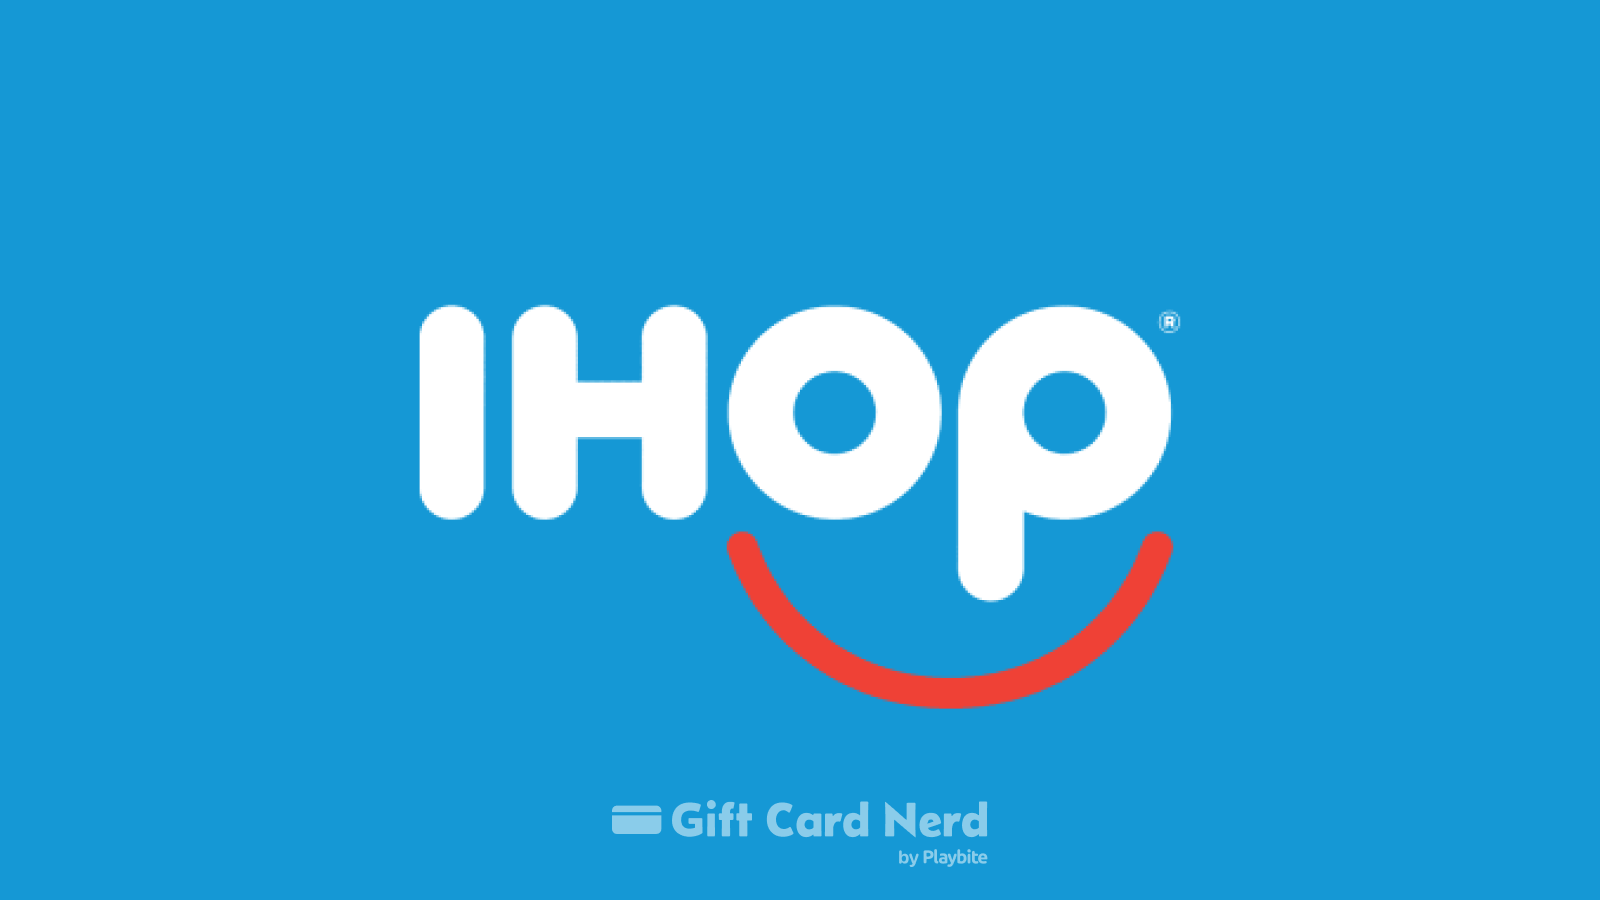 Can I Use an IHOP Gift Card on Uber Eats?